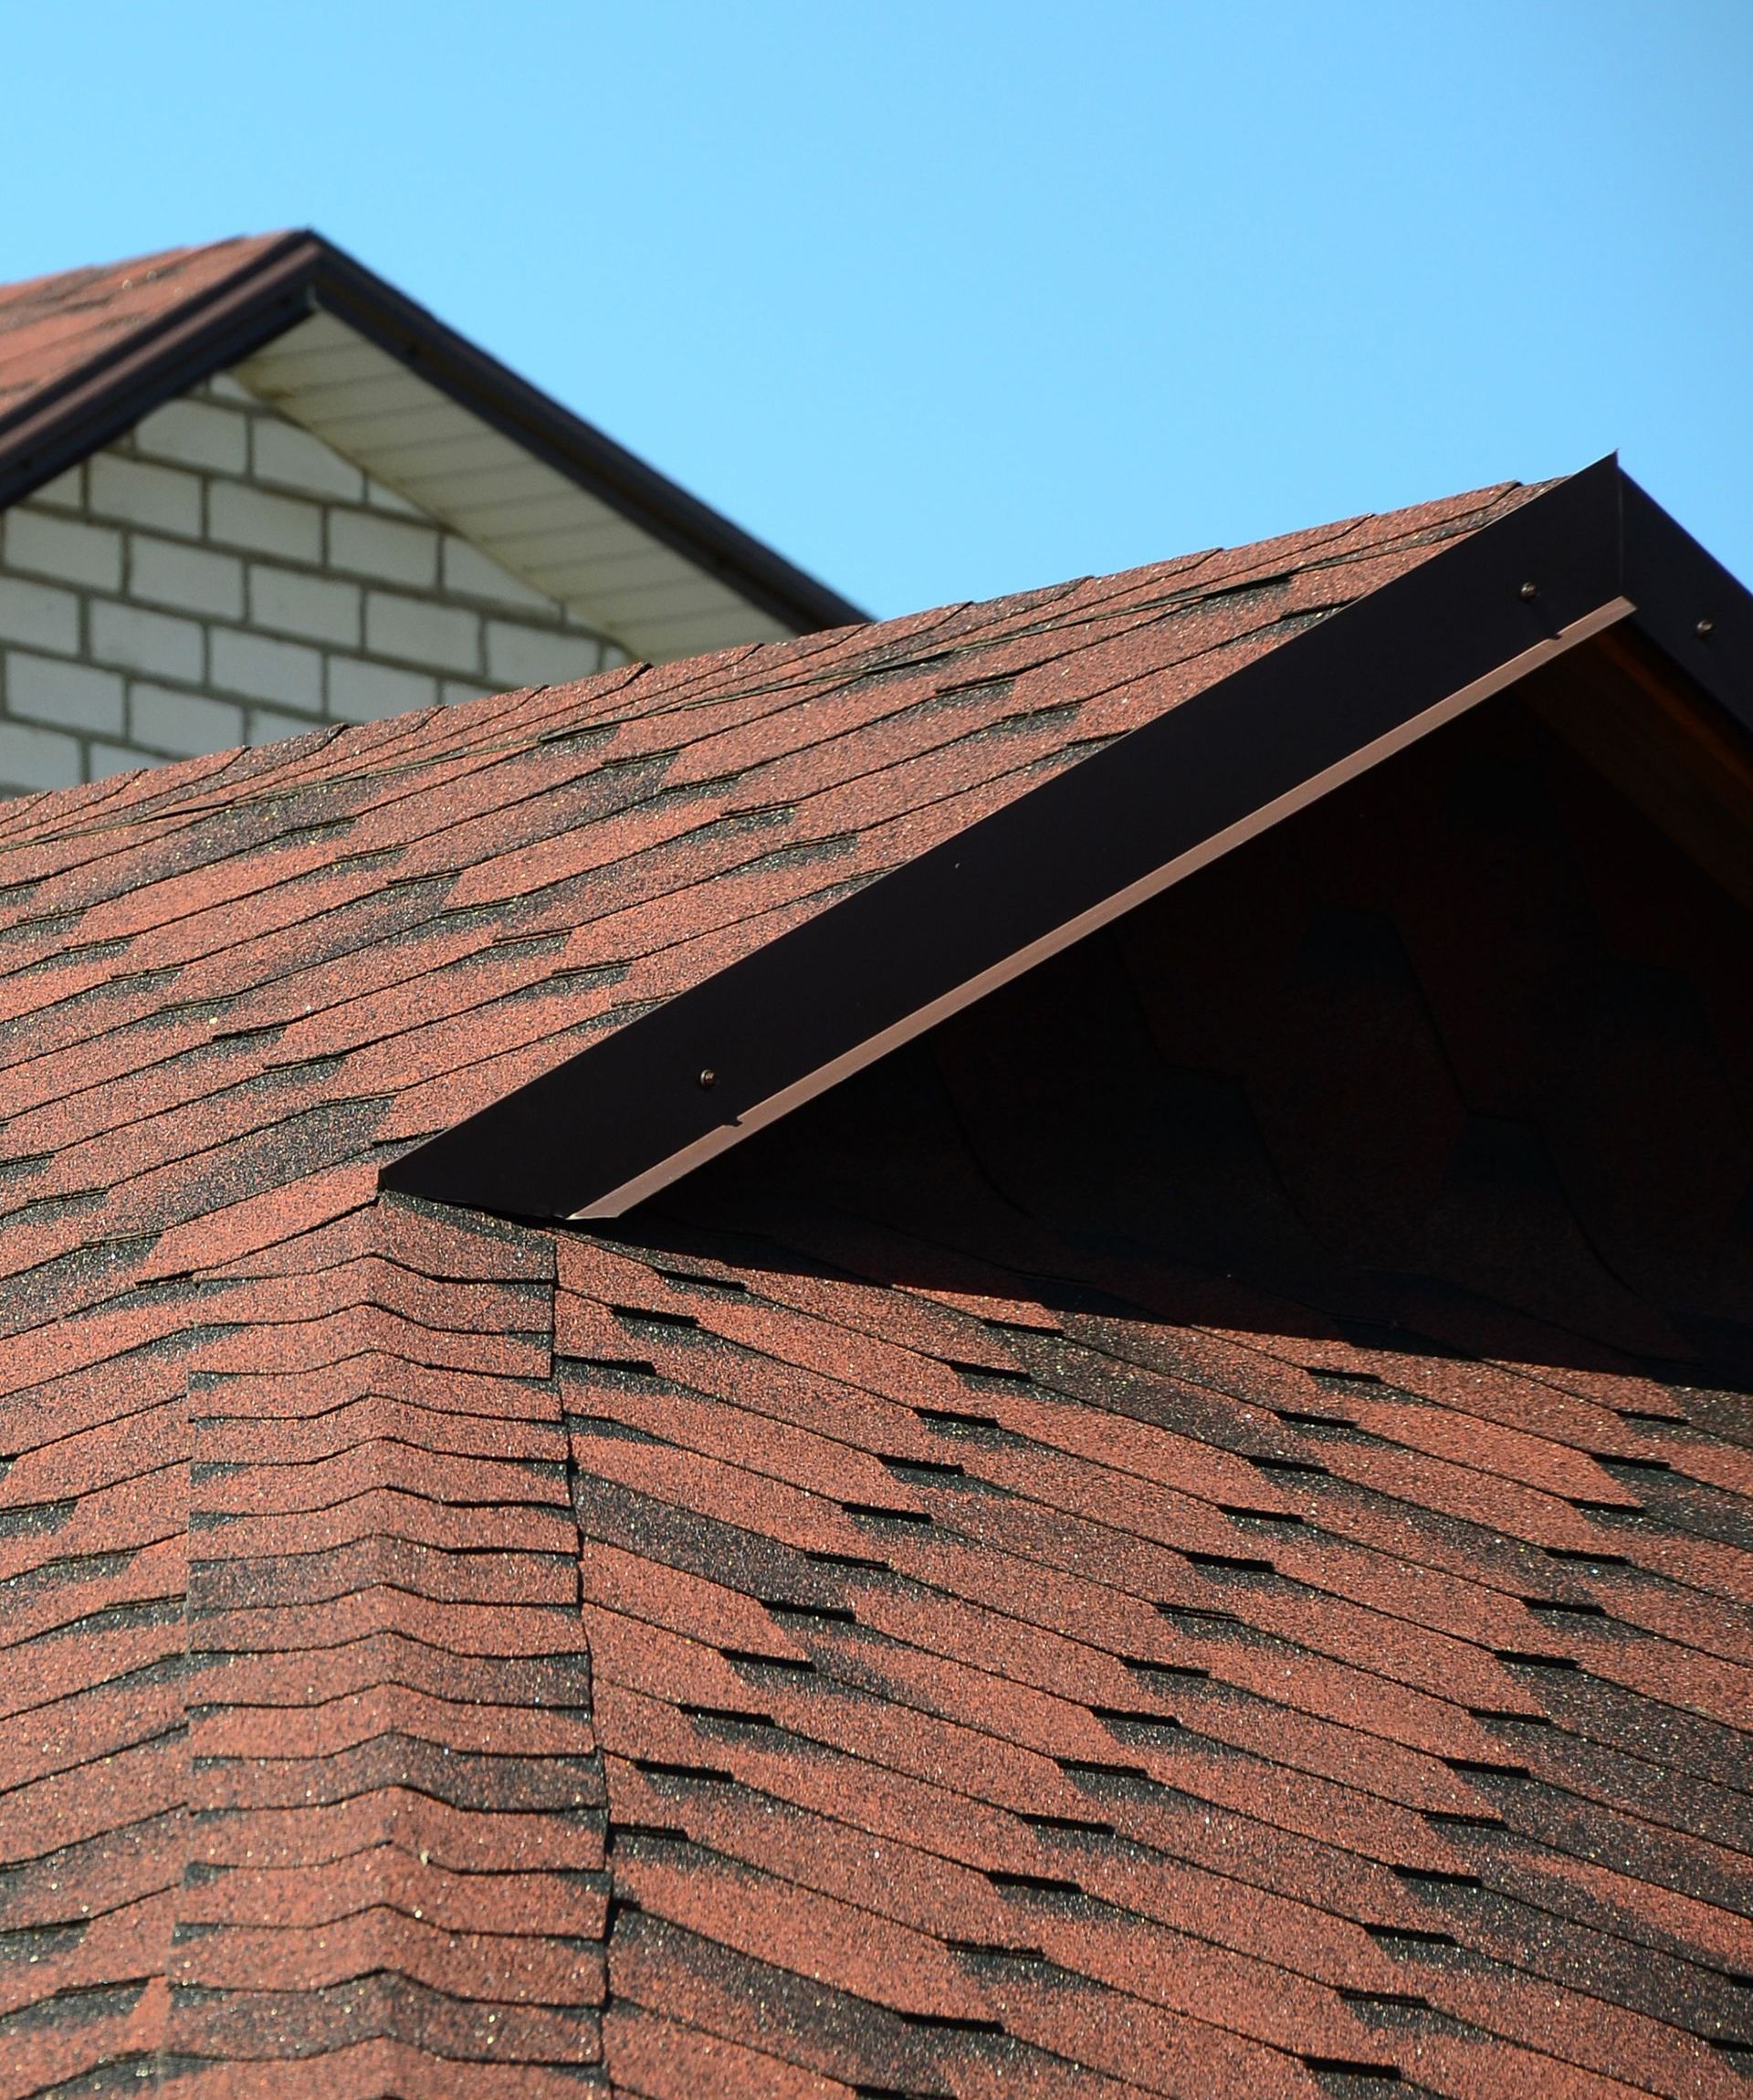 Transform Your Home With Top-Notch Roof Replacement Services by Chavez Enterprises in Fulton, MO.